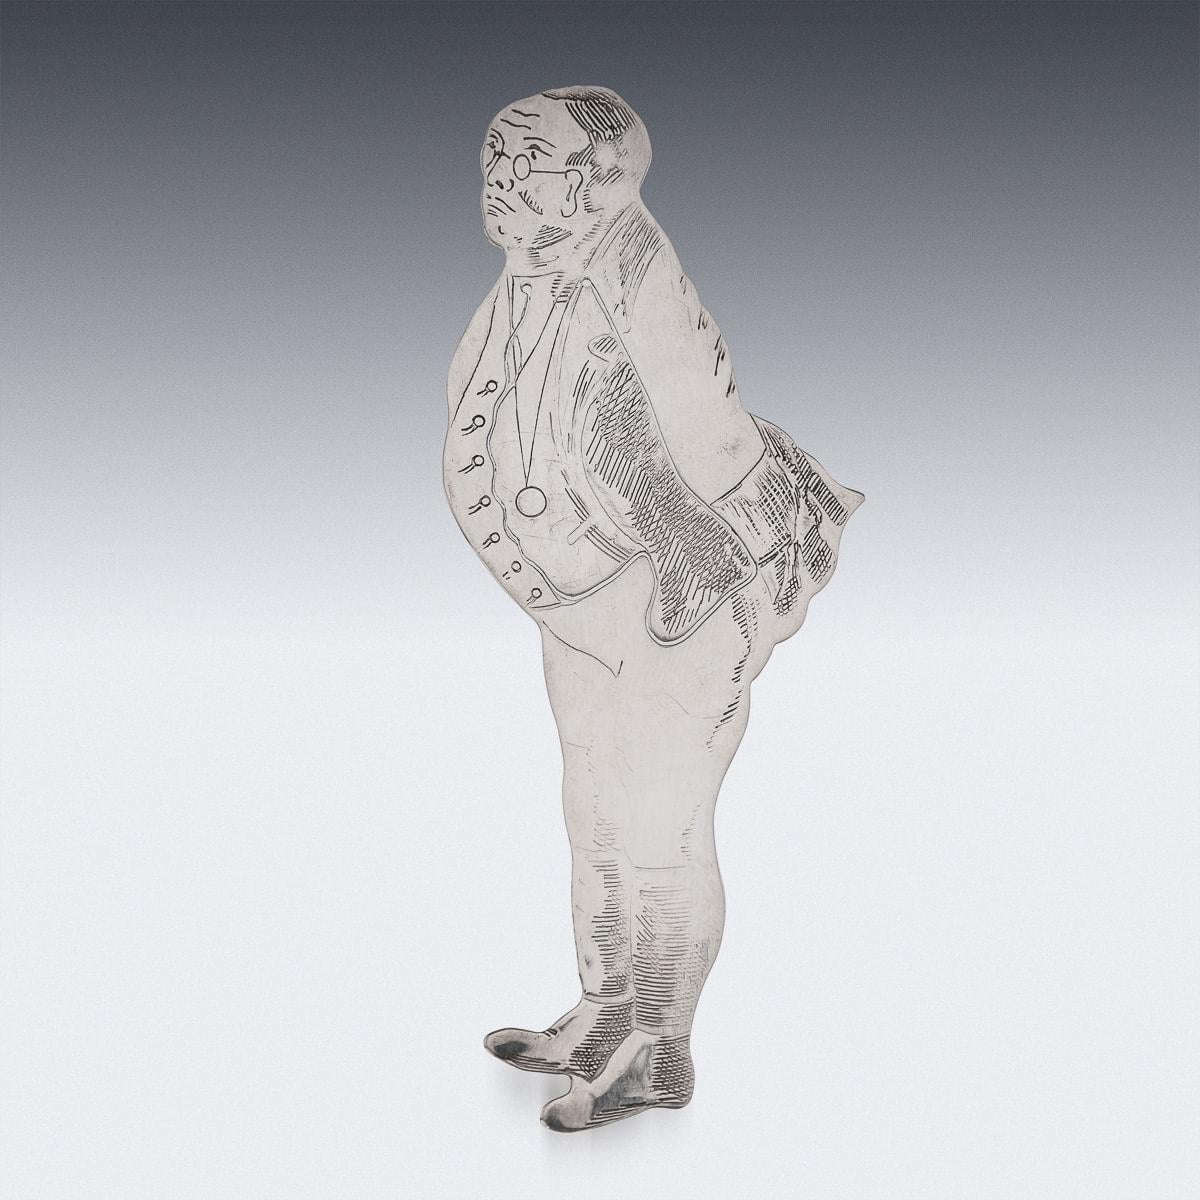 A superb late 20th Century English solid silver novelty bookmark. This bookmark depicts a gentleman called Samuel Pickwick. Samuel Pickwick is a fictional character and the main protagonist in The Pickwick Papers (1836), the first novel by author